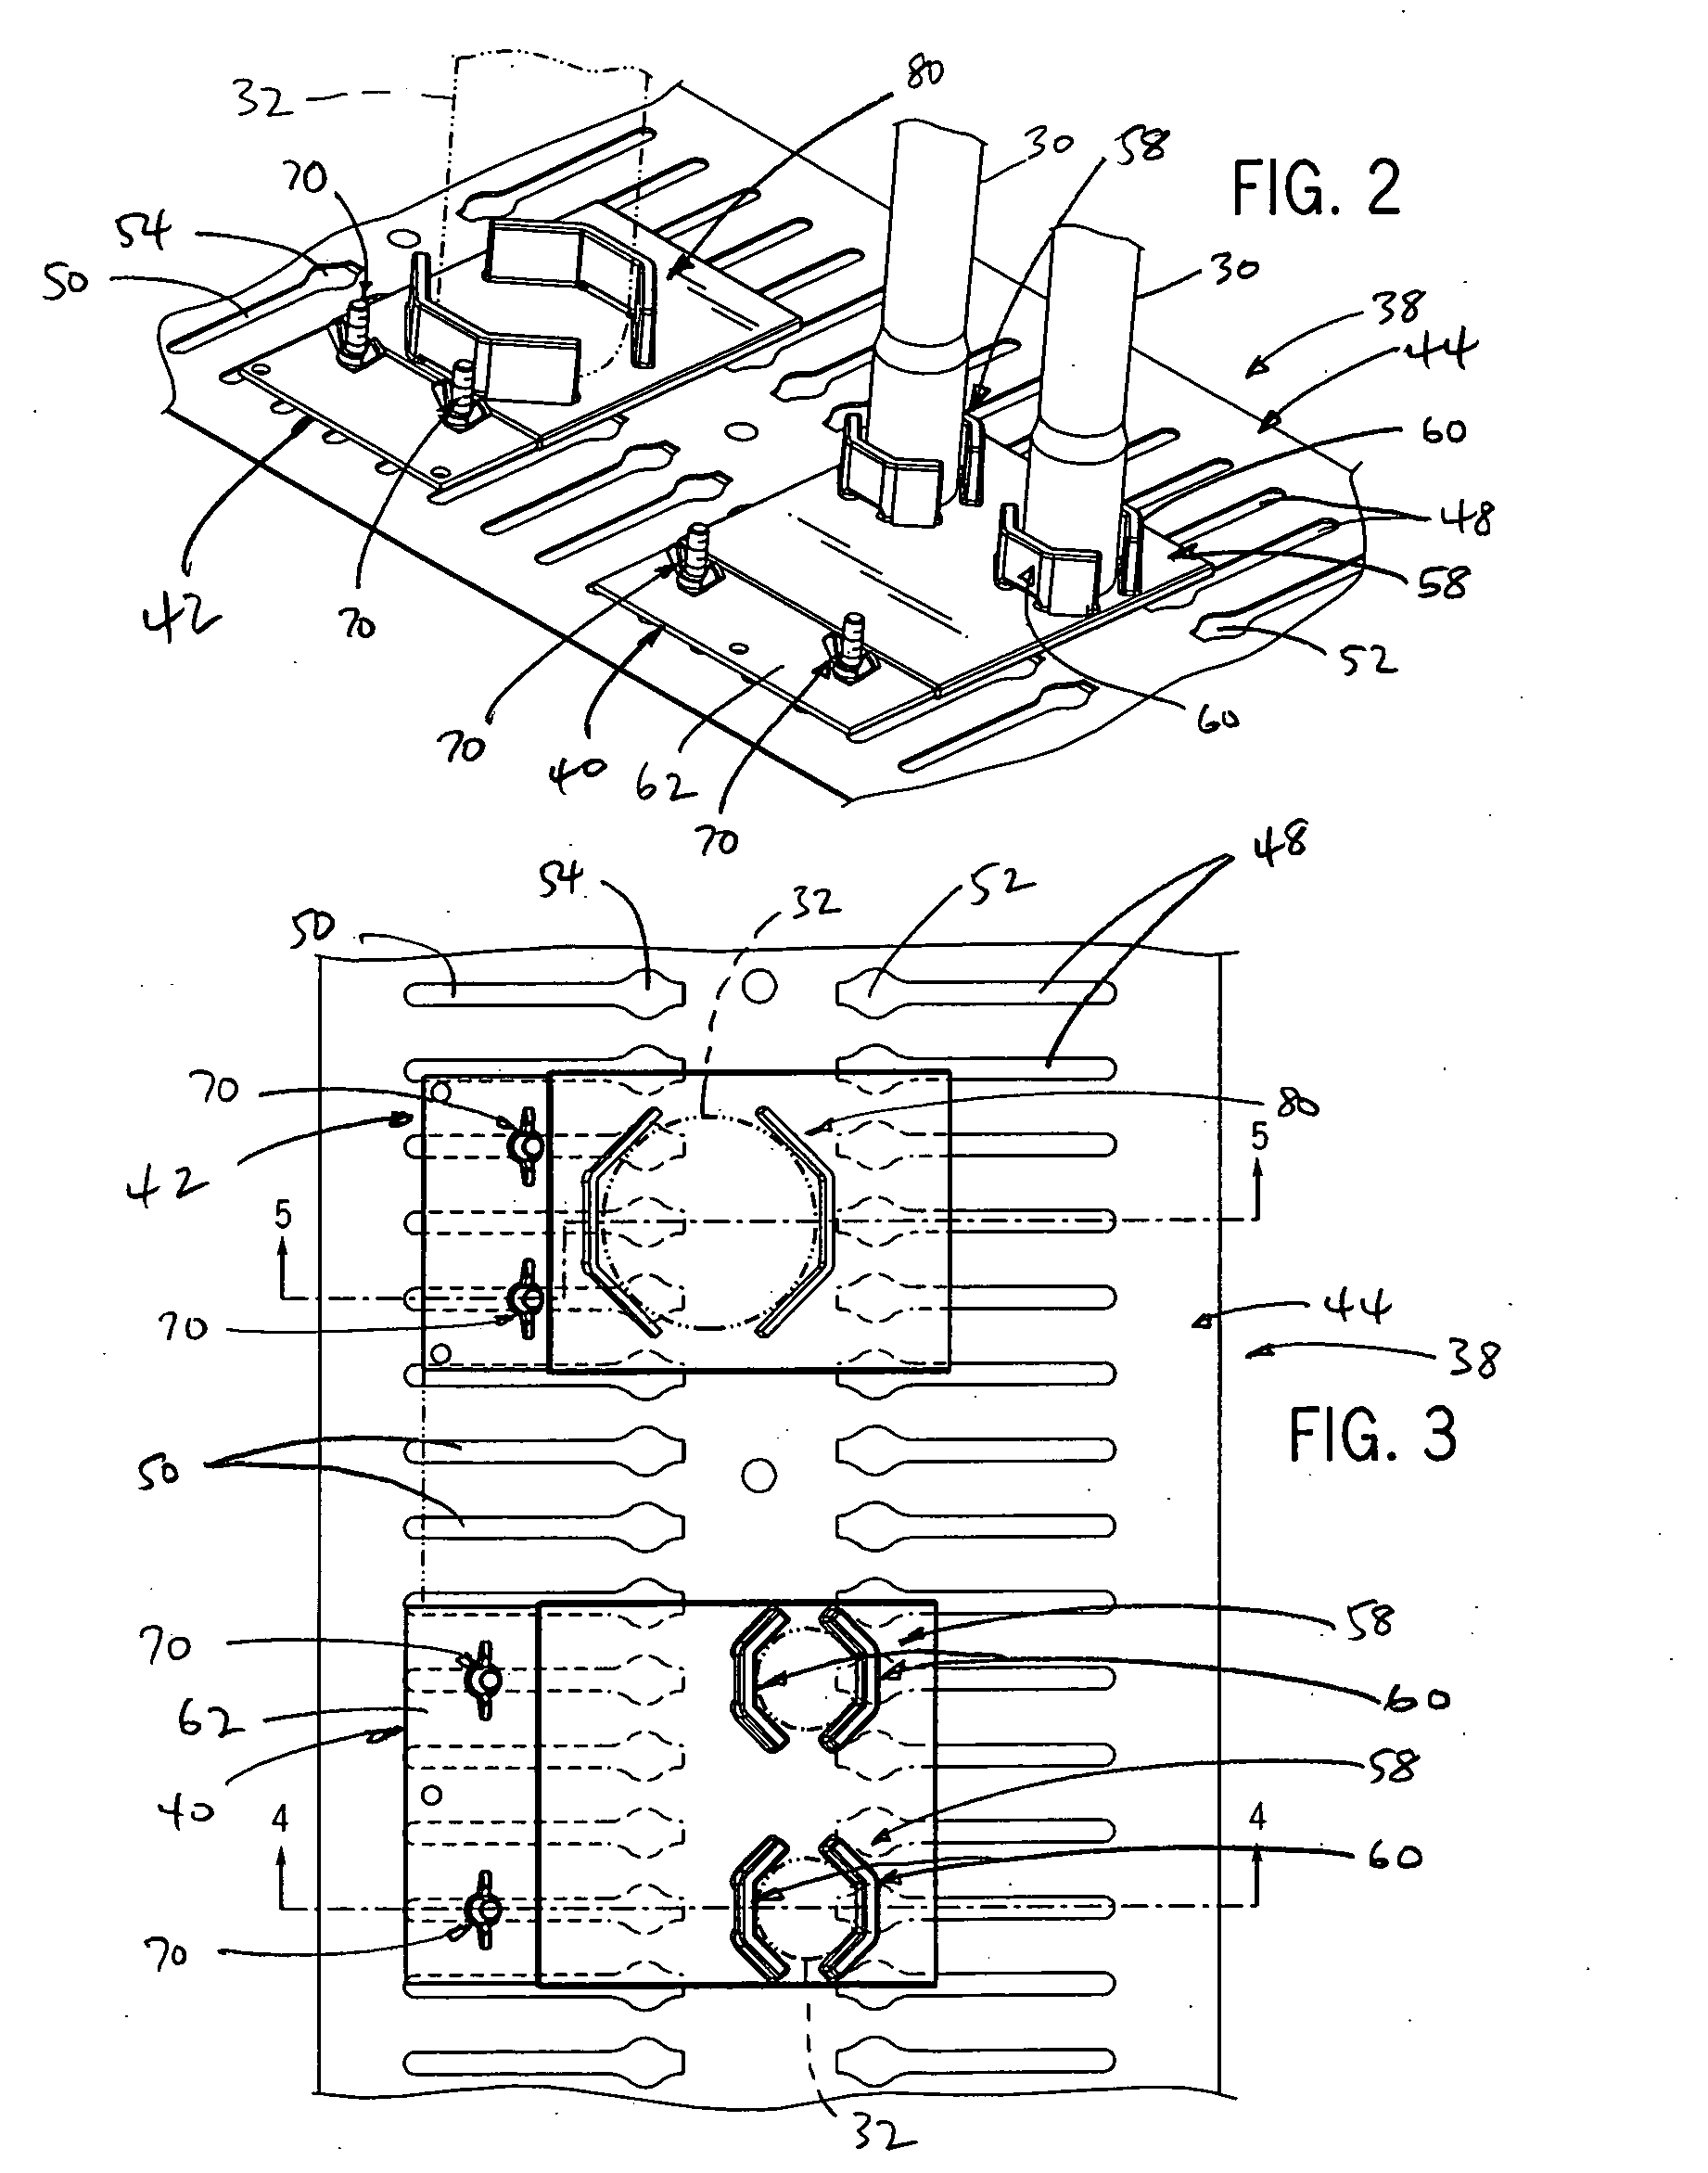 Support arrangement for the lower end of an upright elongated article, such as a firearm or related accessory